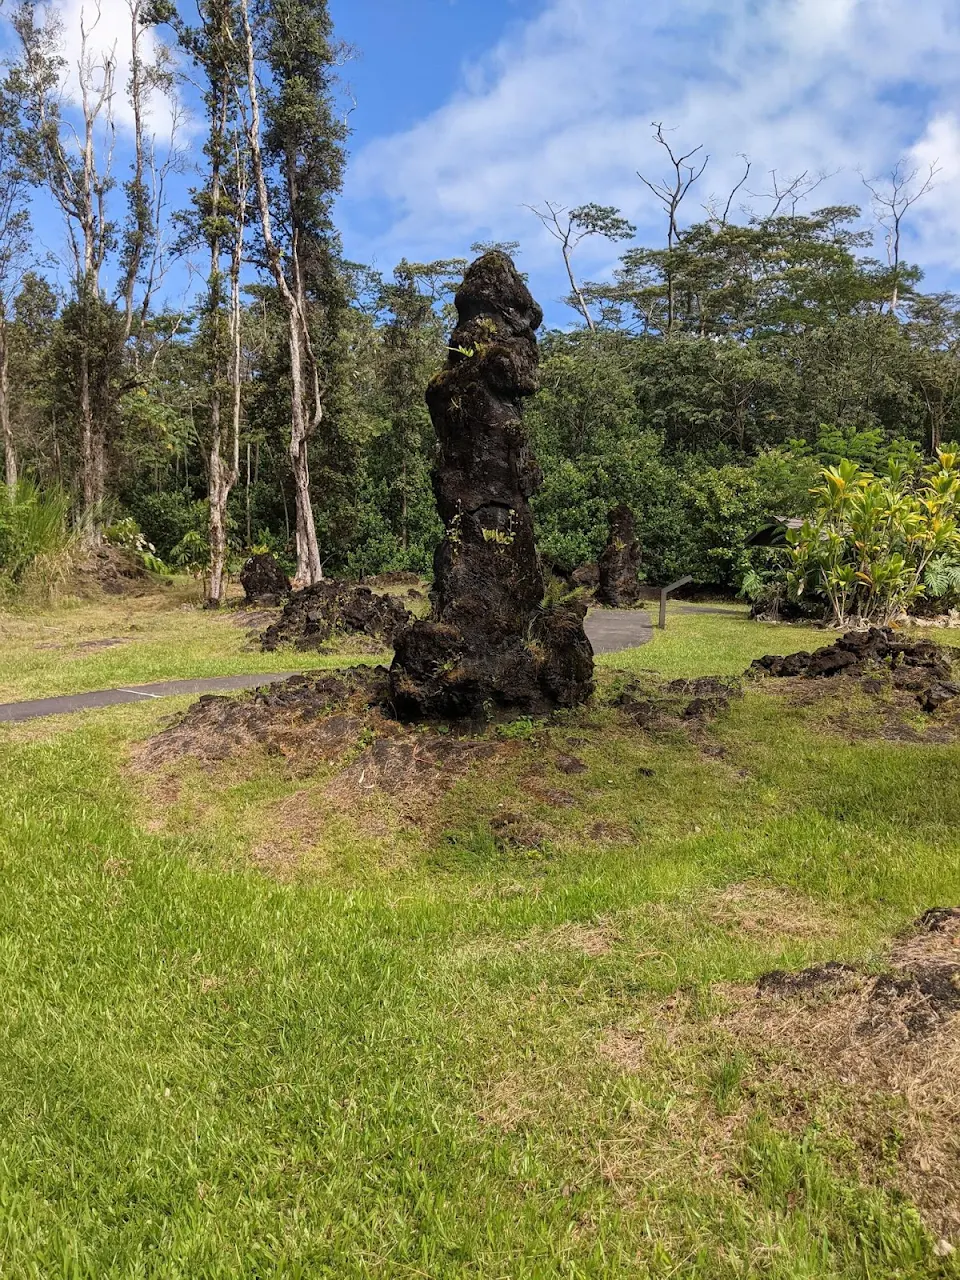 This lava rock in Hawaii formed when a lava flow hit a tree and then receded.